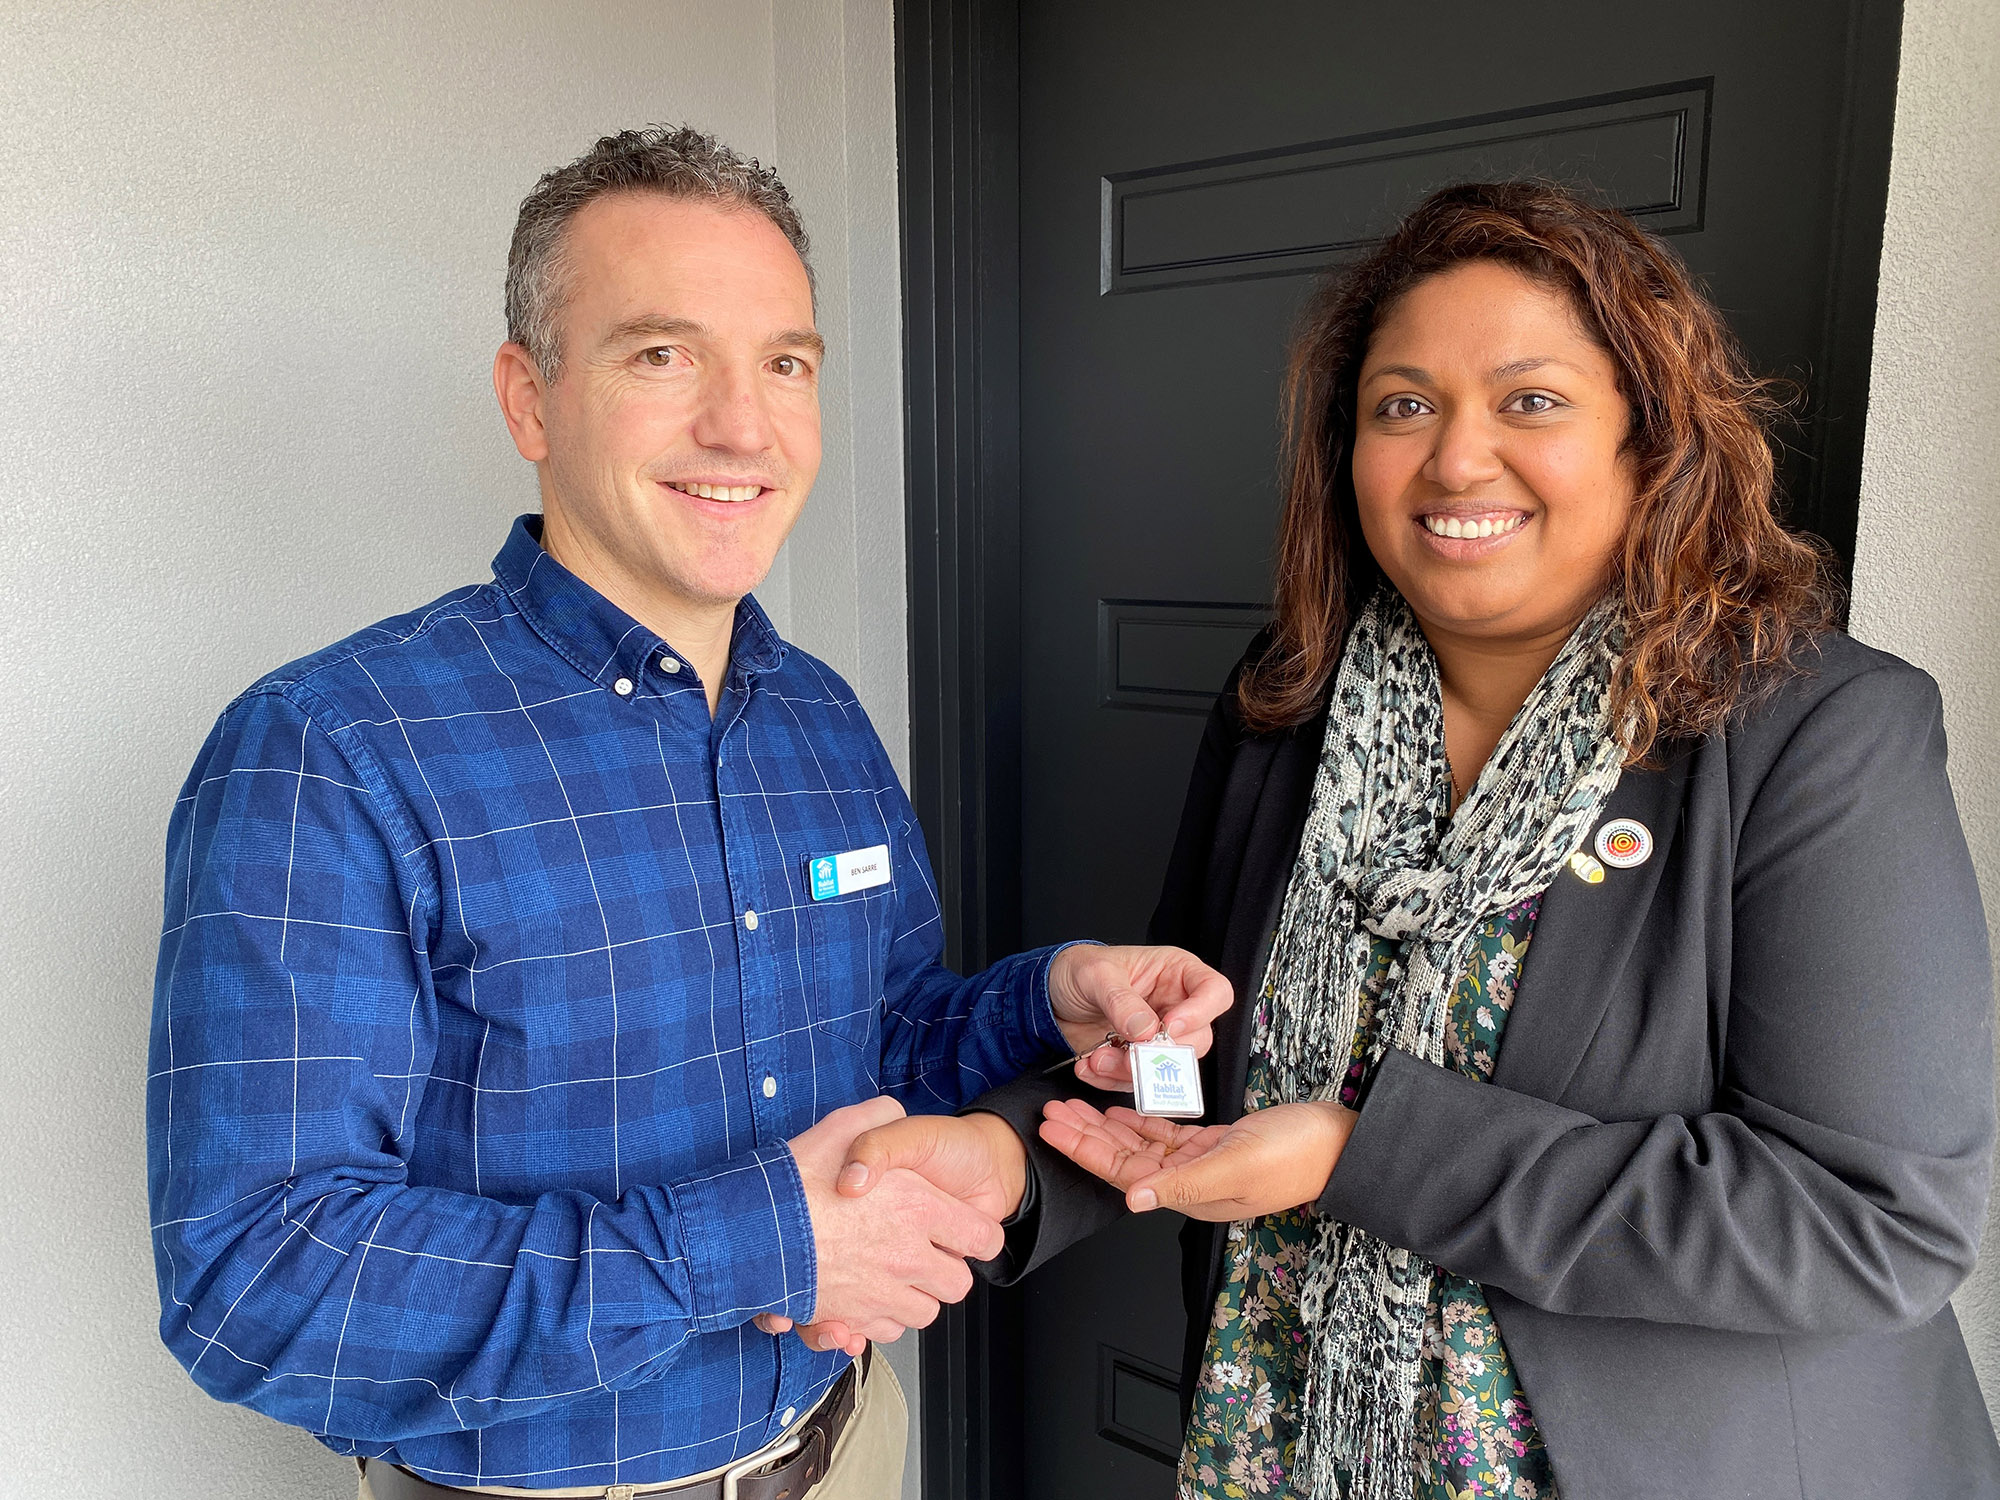 PROJECT MILESTONE: Habitat for Humanity South Australian executive director Ben Sarre hands over the keys to the Studio Purpose apartments to ac.care Murraylands homelessness program manager Thanuja Hiripitiyage.